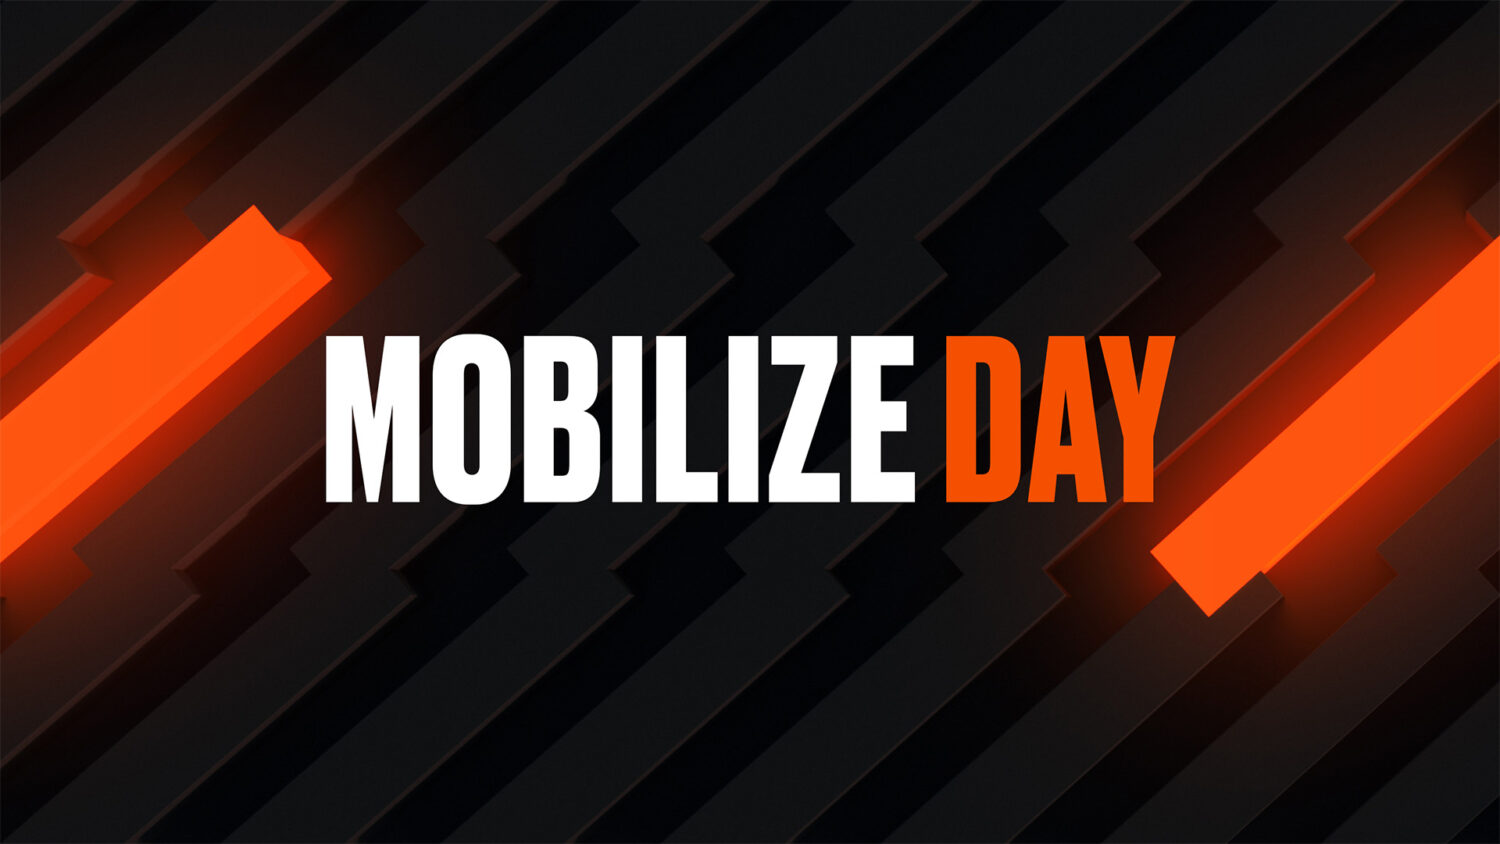 Mobilize_Day_Key visual.jpg